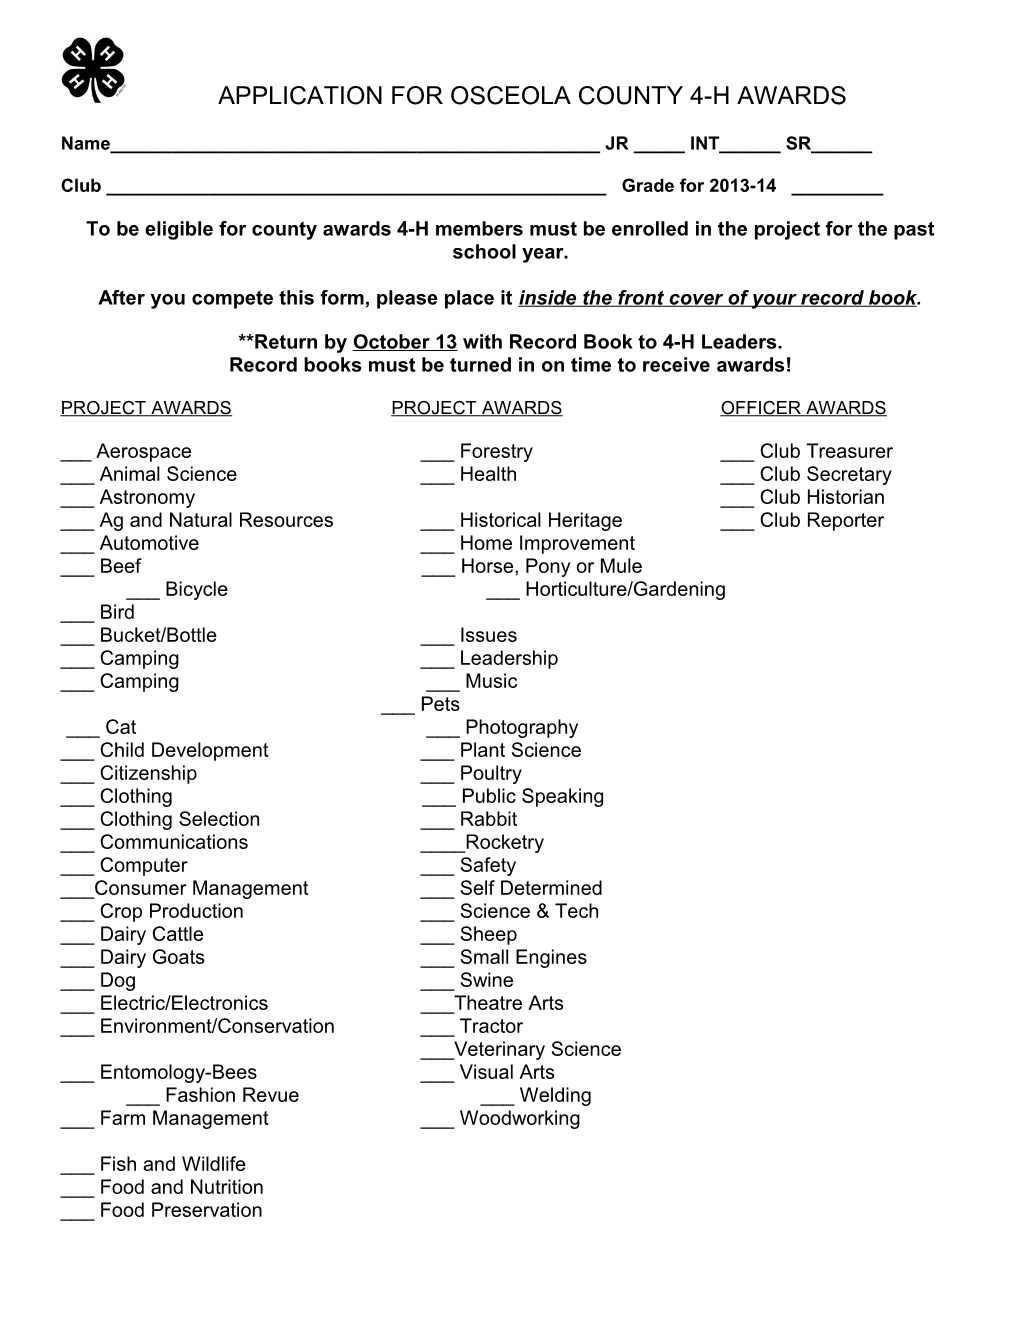 Application for Worth County 4-H Awards